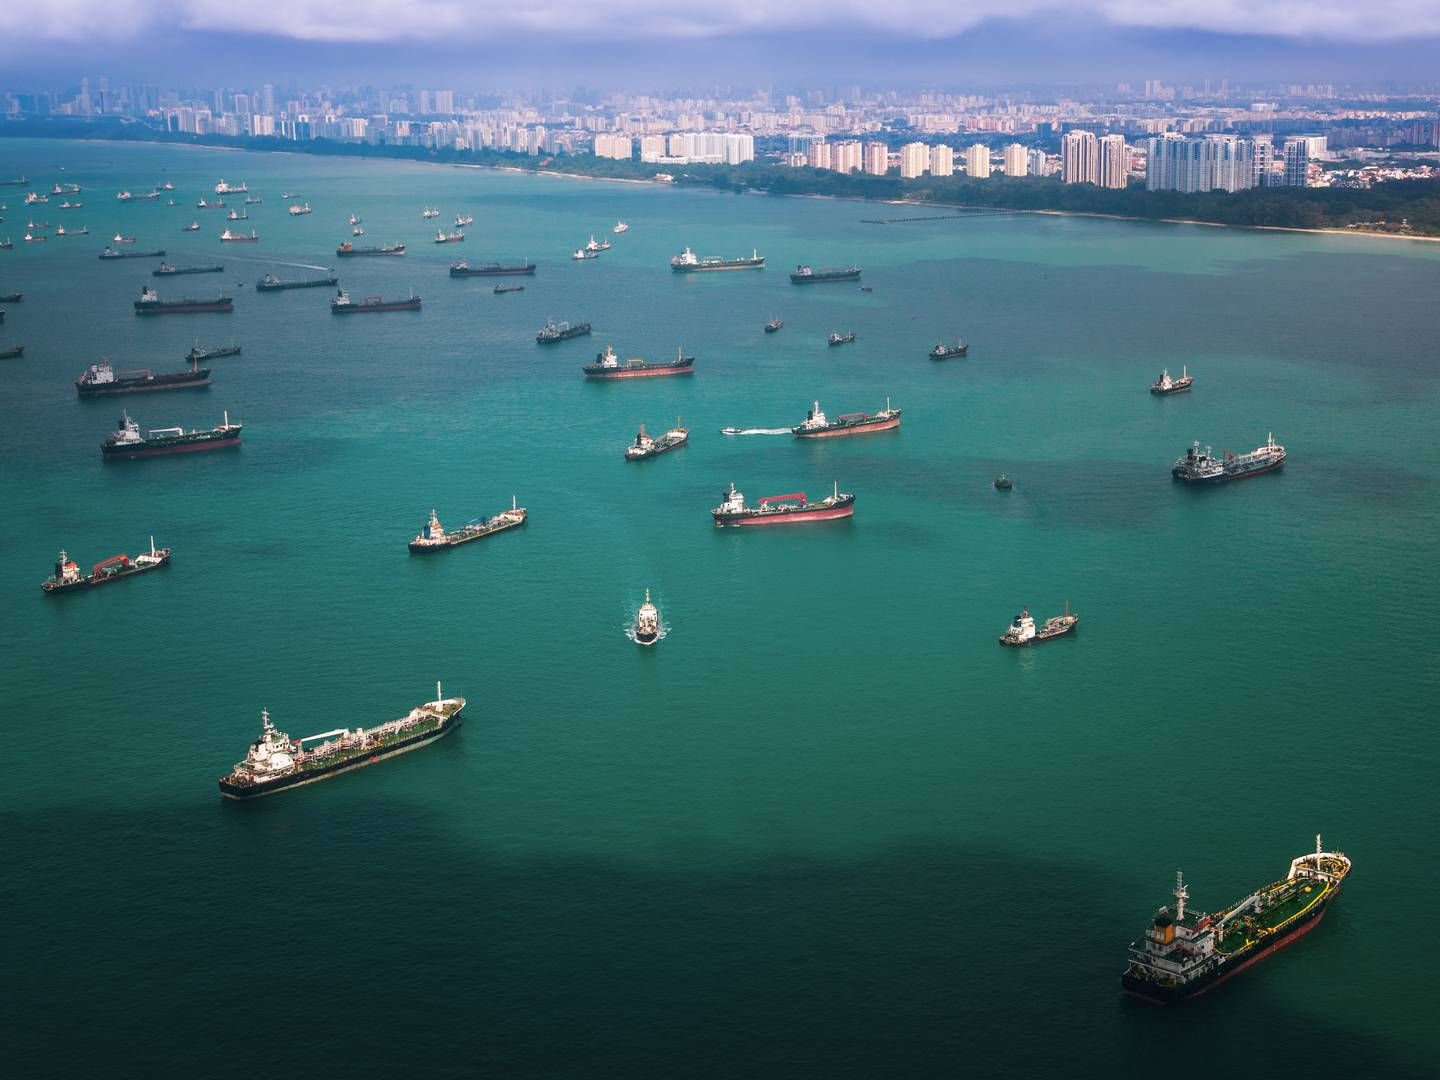 Singapore has commenced a large court case against the founder of Hin Leong Trading, which contained the tanker carrier Ocean Tankers. | Photo: Colourbox